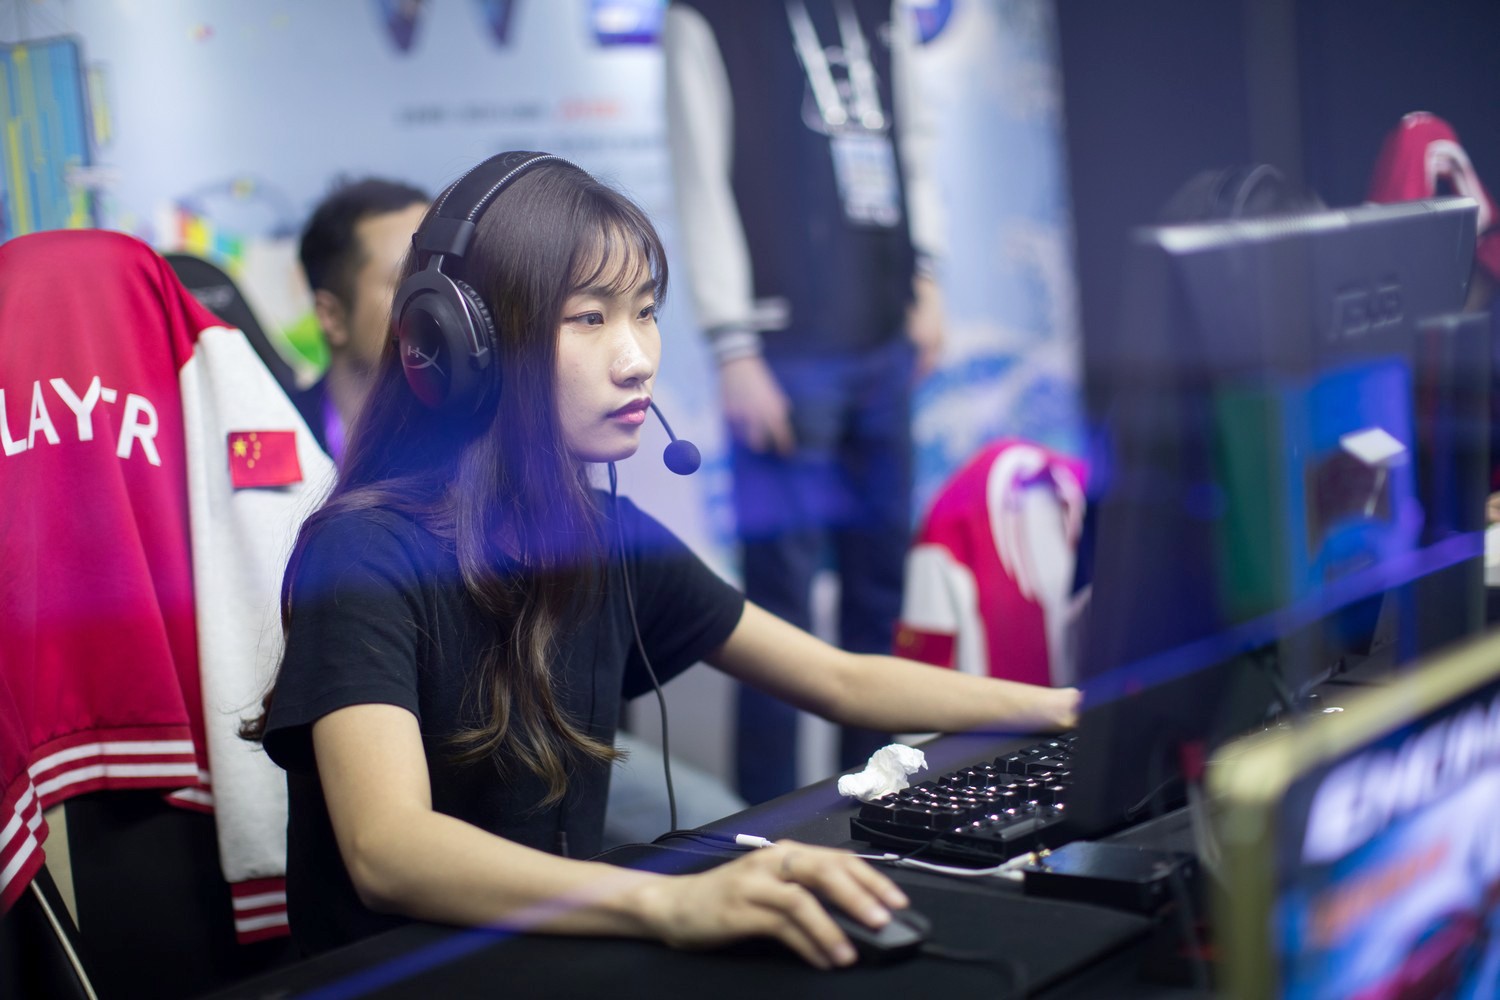 Women are no longer a novelty in China's e-sports scene but challenges  remain for pro gamers | South China Morning Post